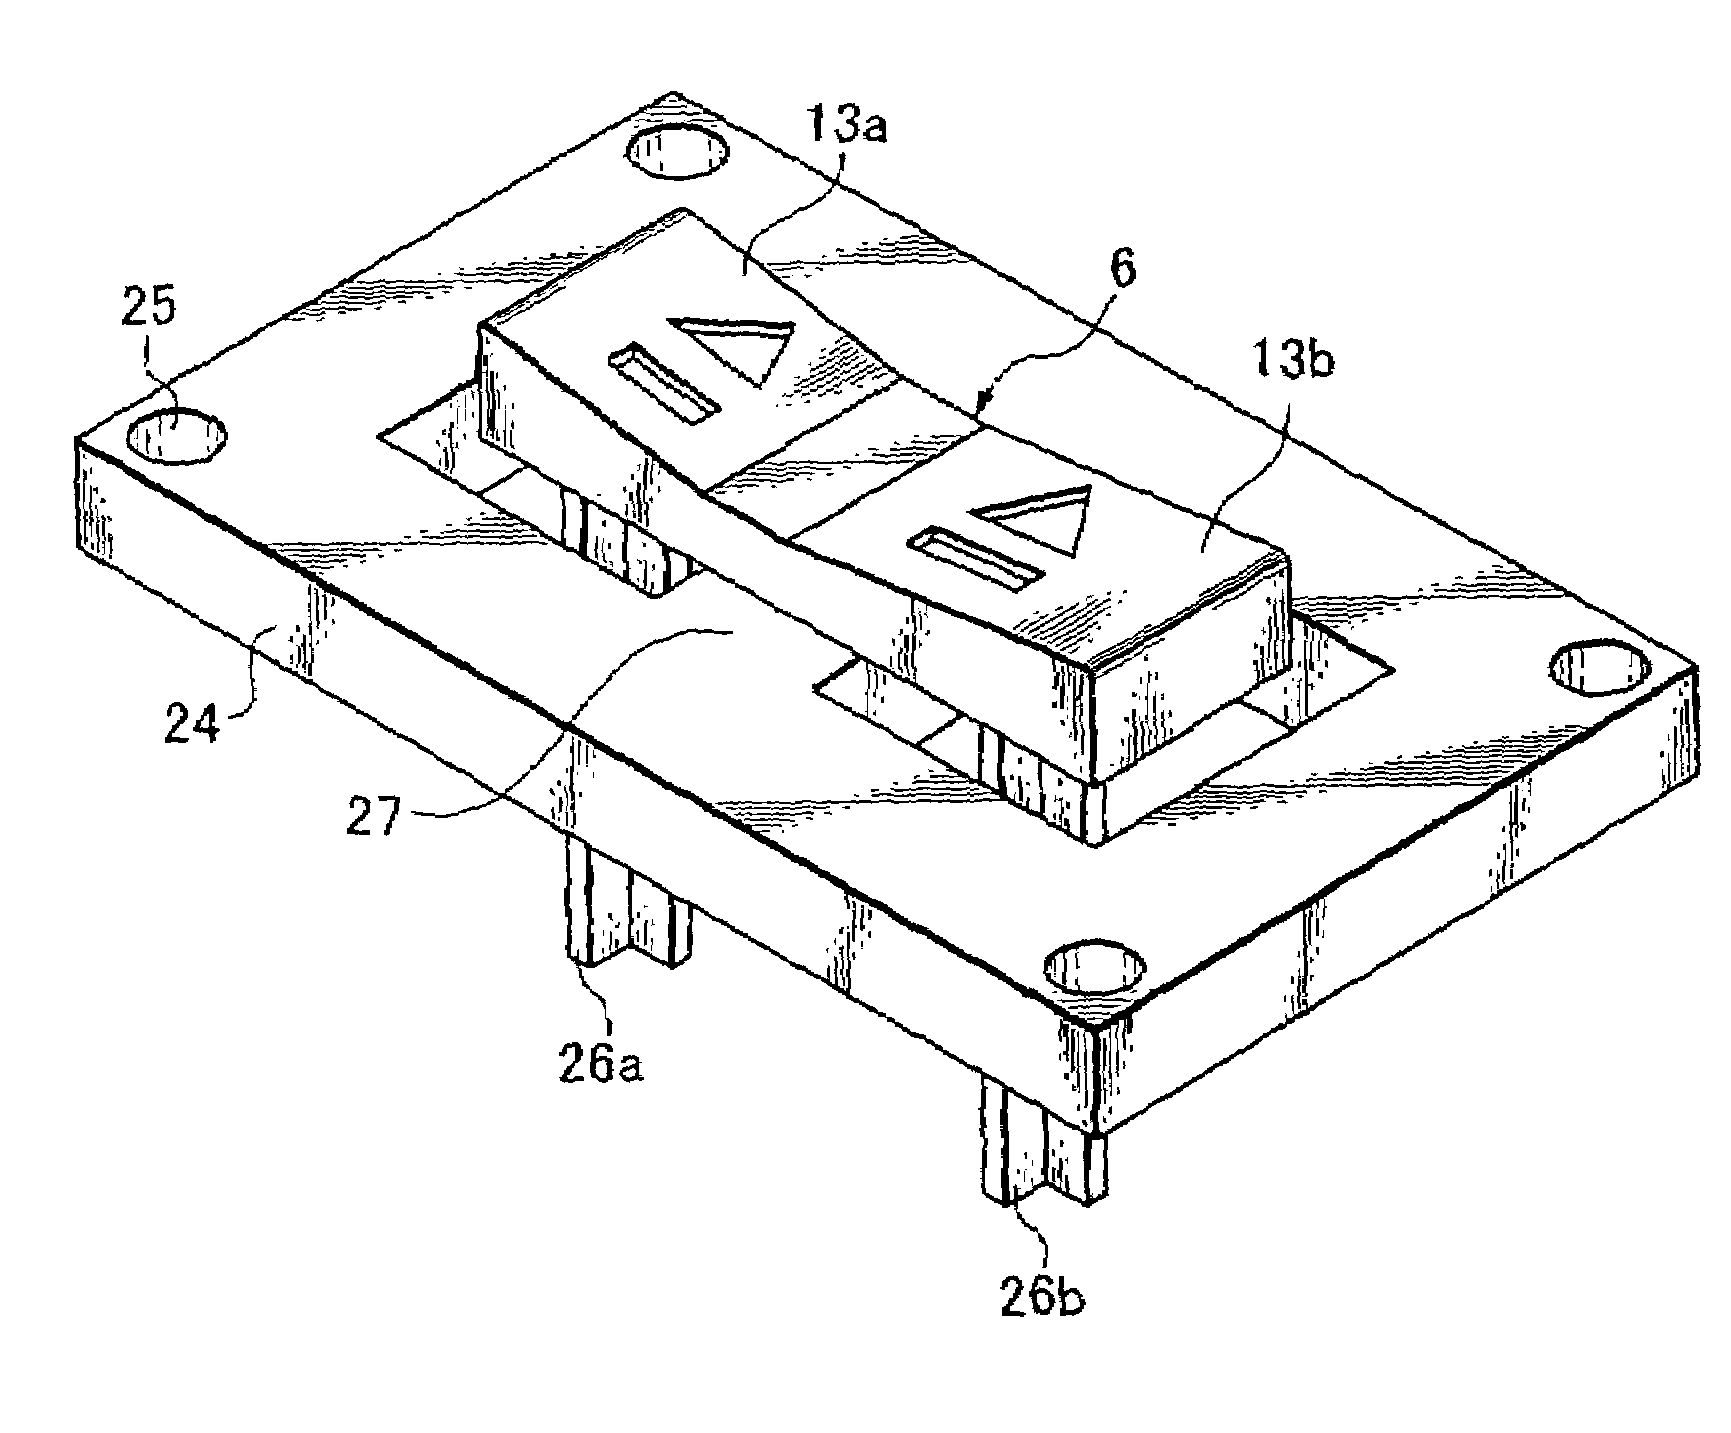 Dual switch for selective removal of recording medium from compound device